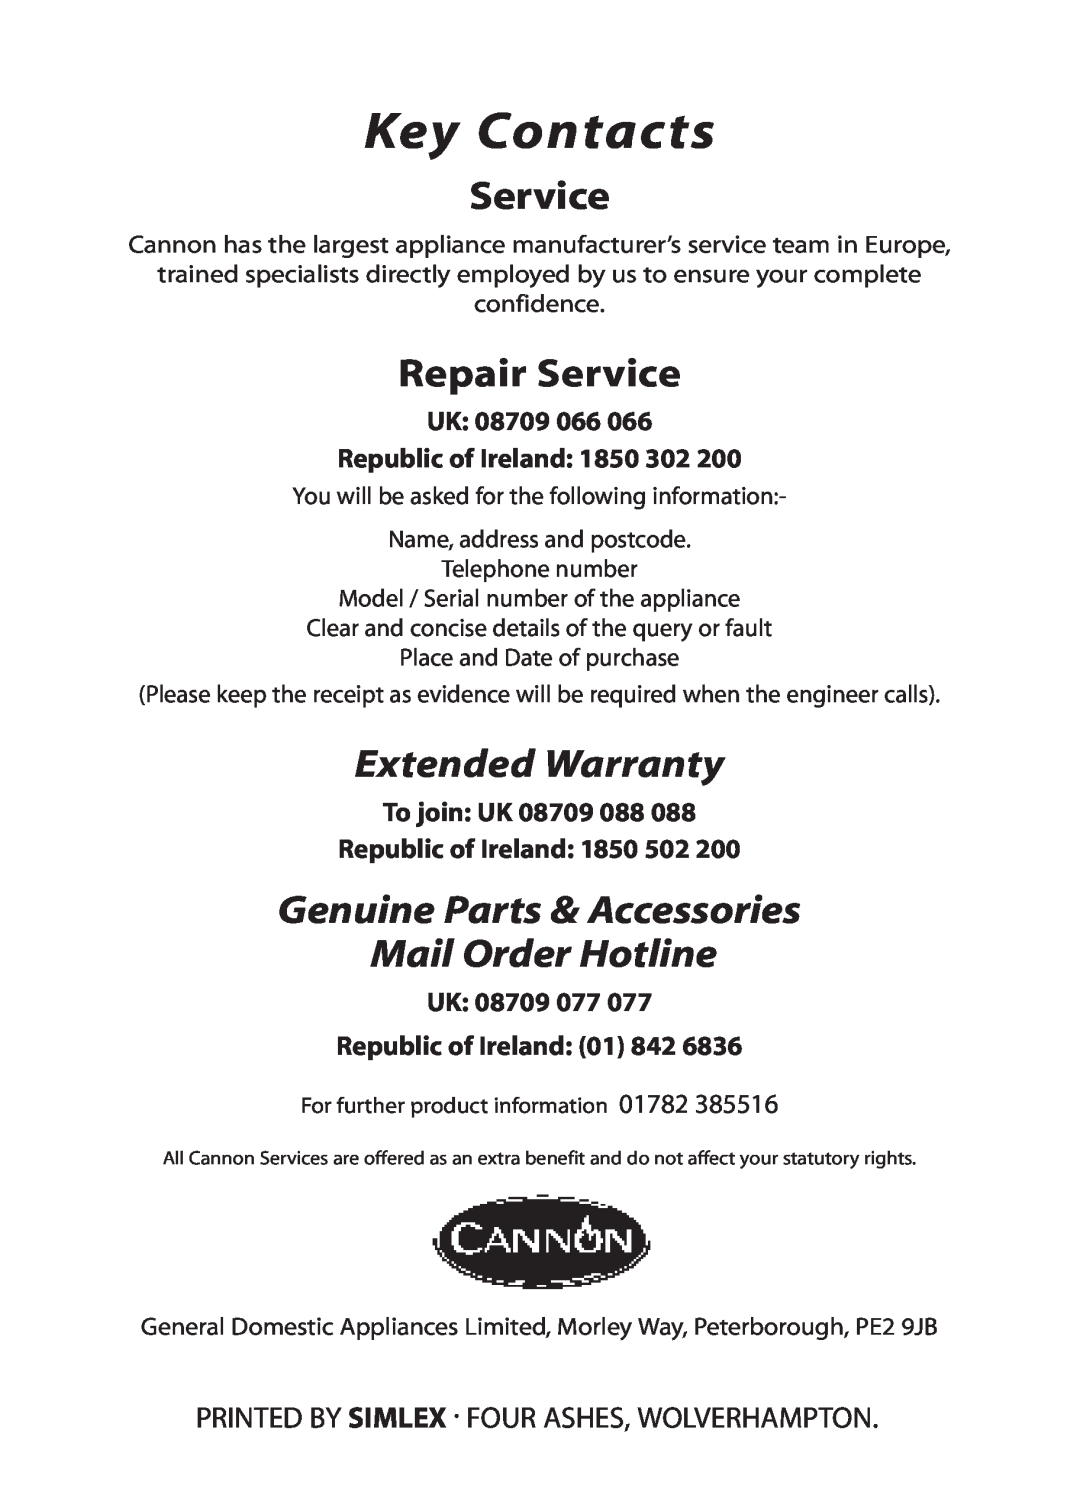 Cannon 10566G, 10565G Key Contacts, Repair Service, Extended Warranty, Genuine Parts & Accessories Mail Order Hotline 